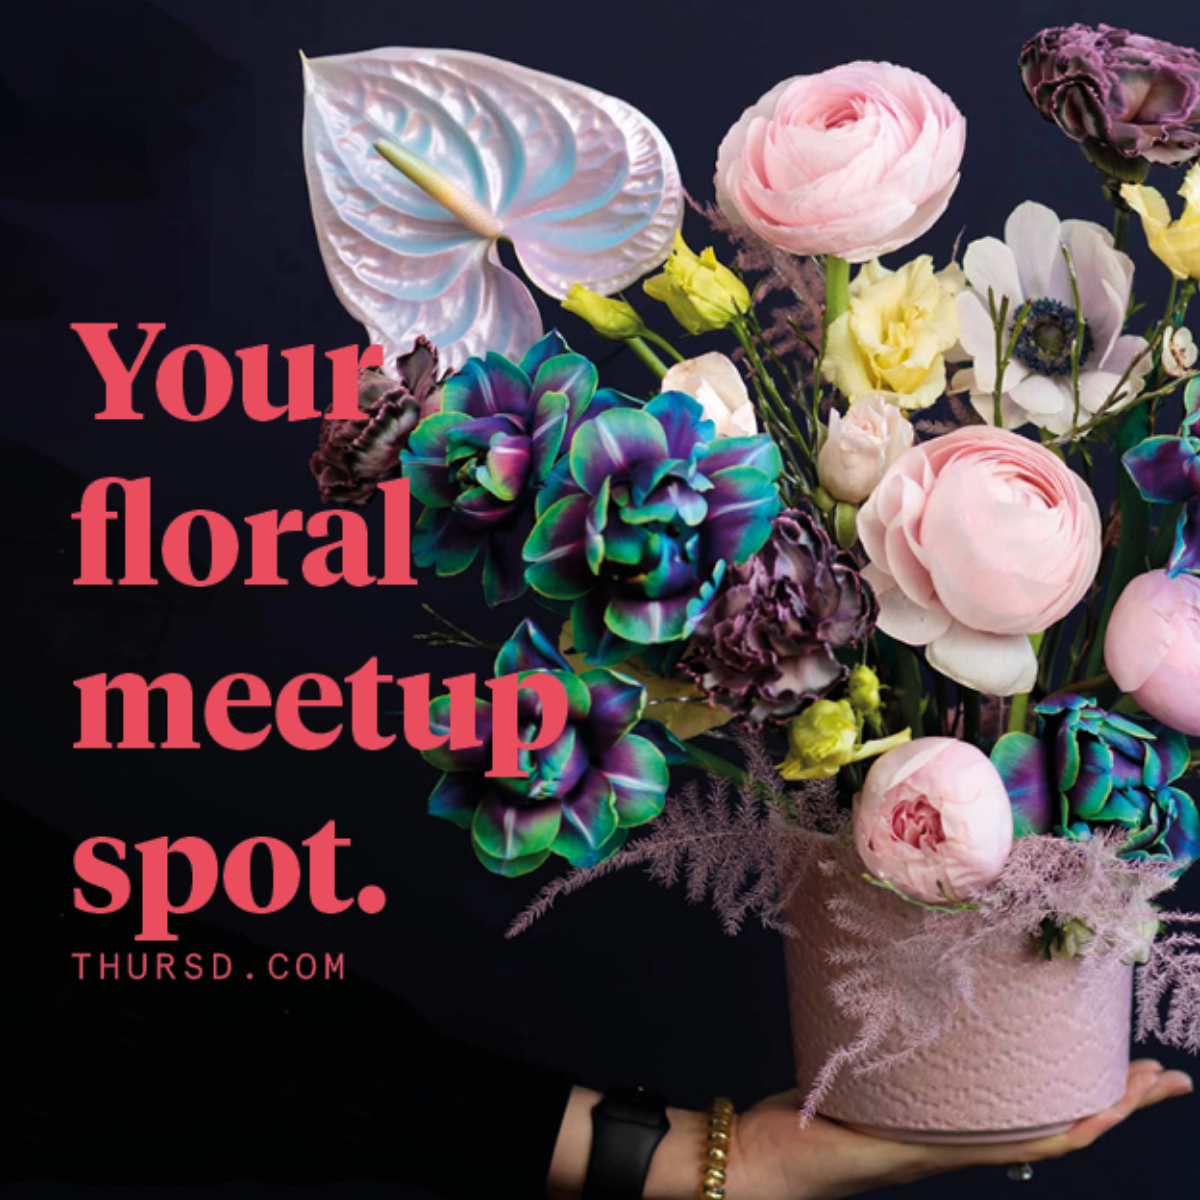 10-facebook-groups-for-florists-you-dont-want-to-miss-featured